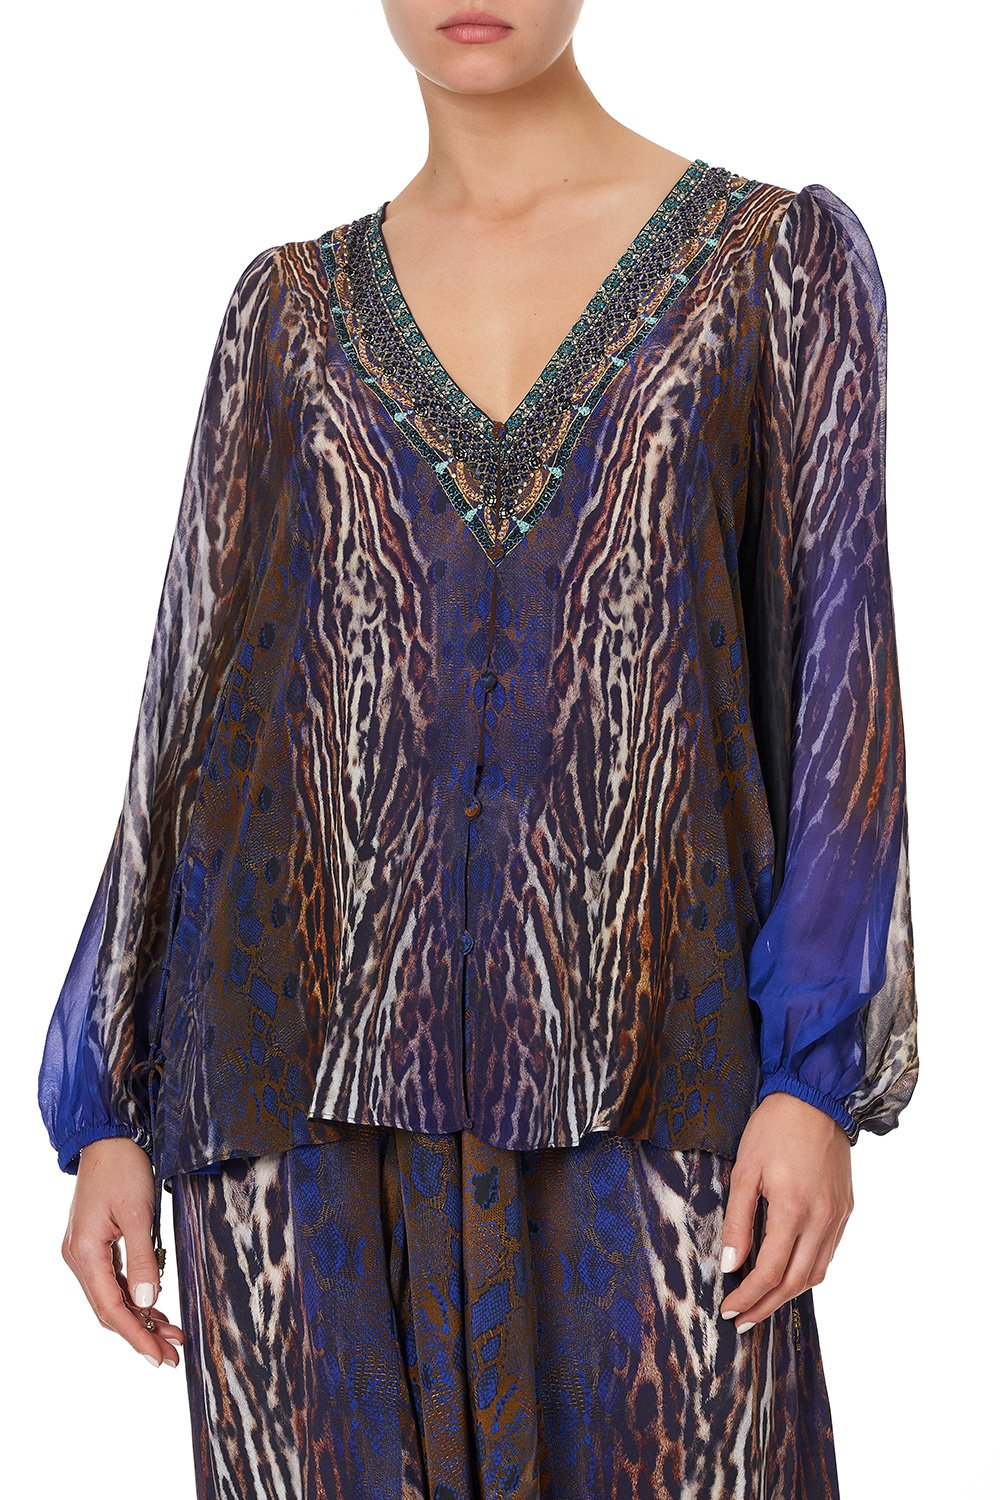 LACE UP SIDE BLOUSE KOMODO QUEEN